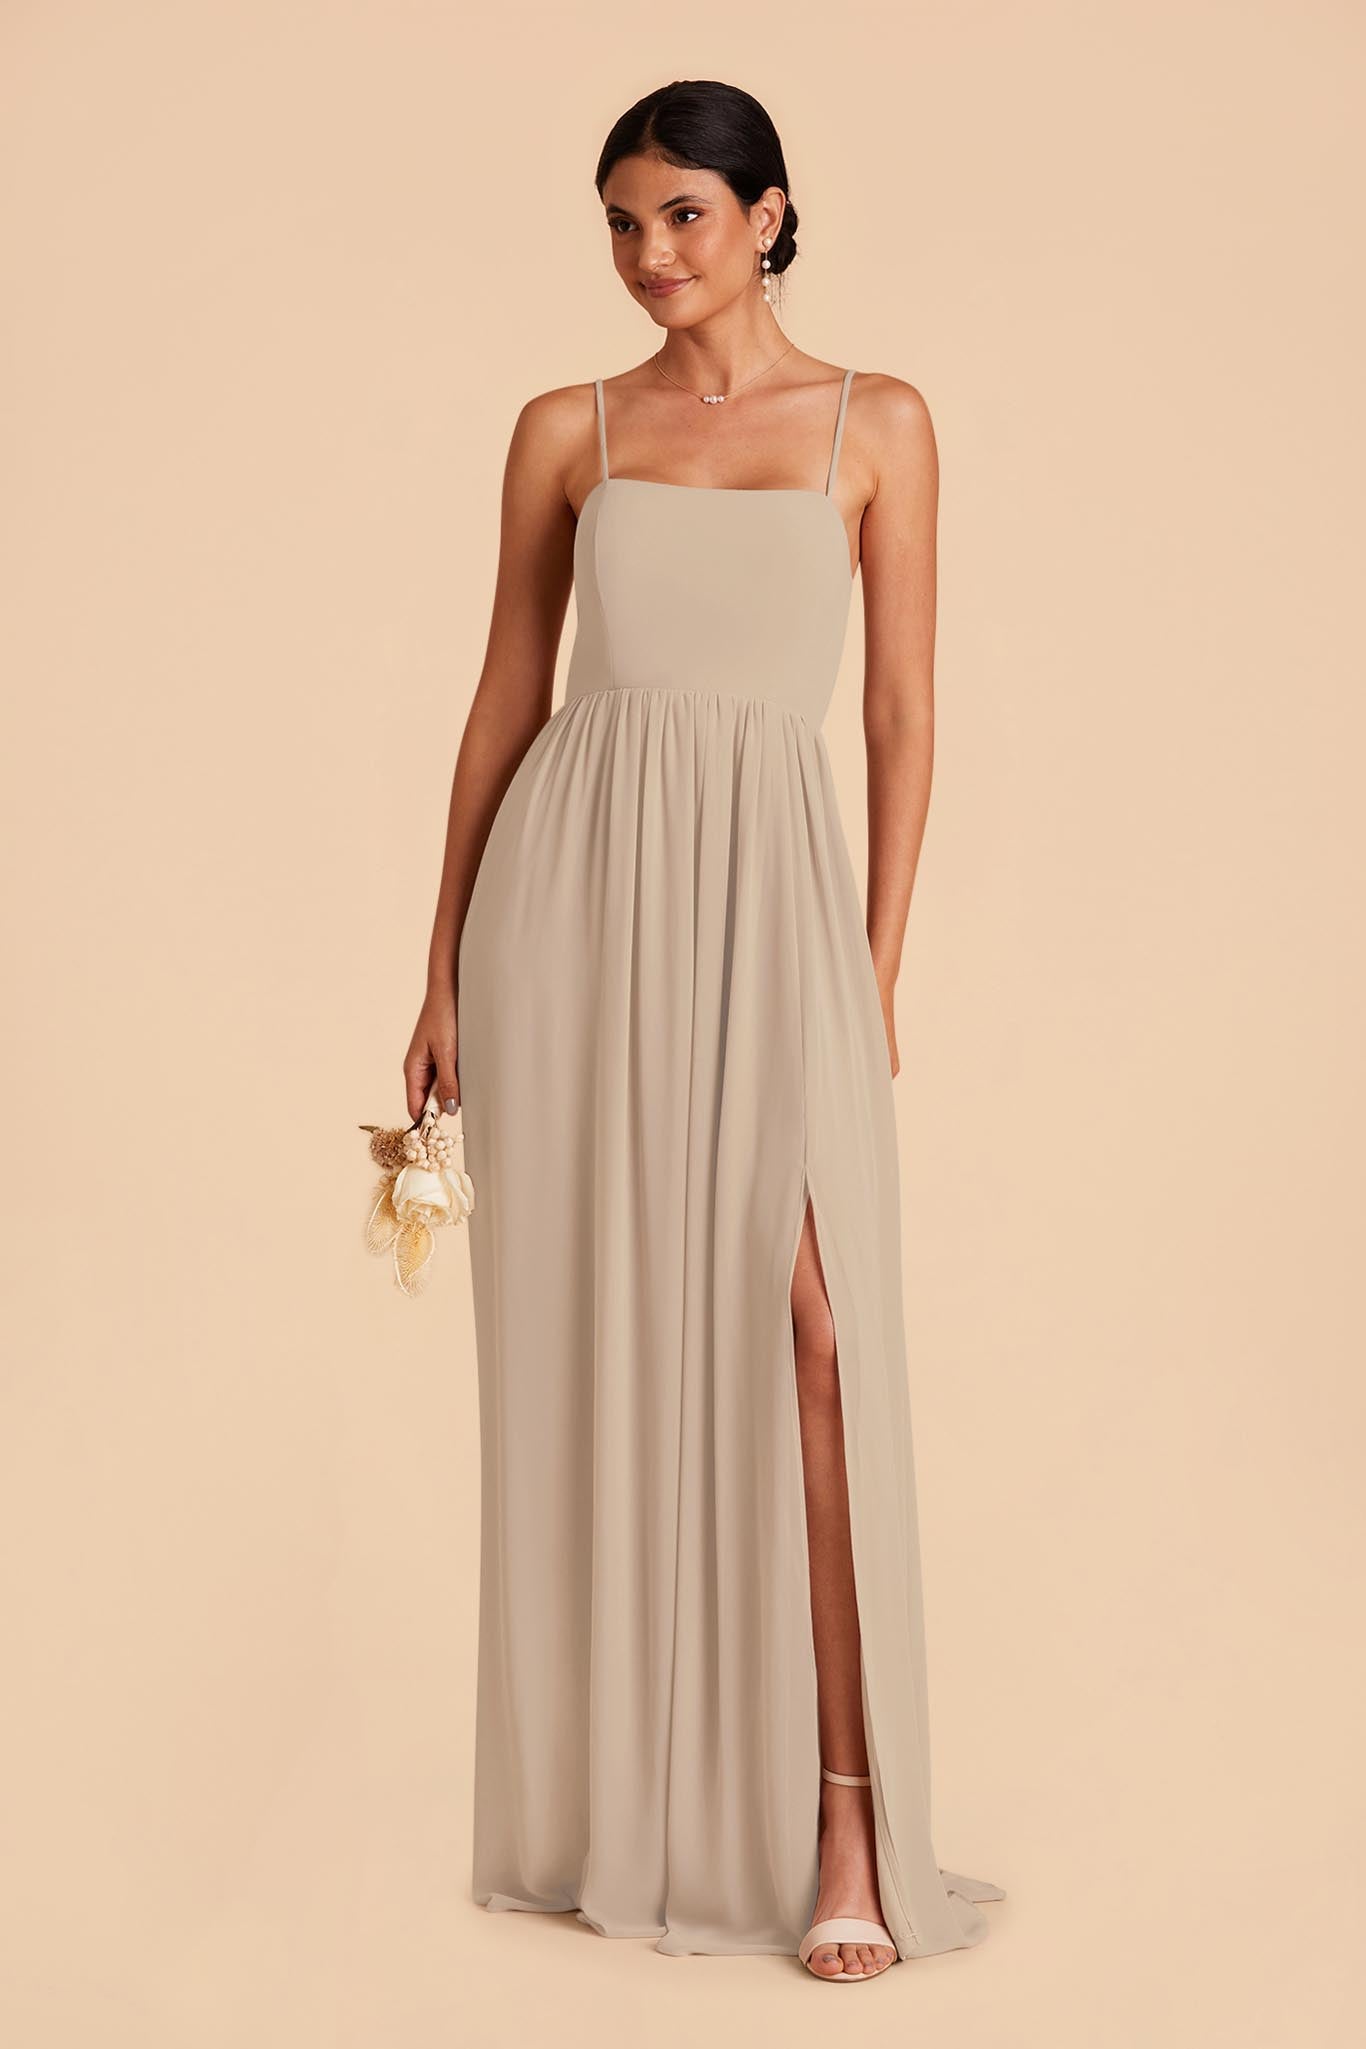 Almond August Convertible Dress by Birdy Grey